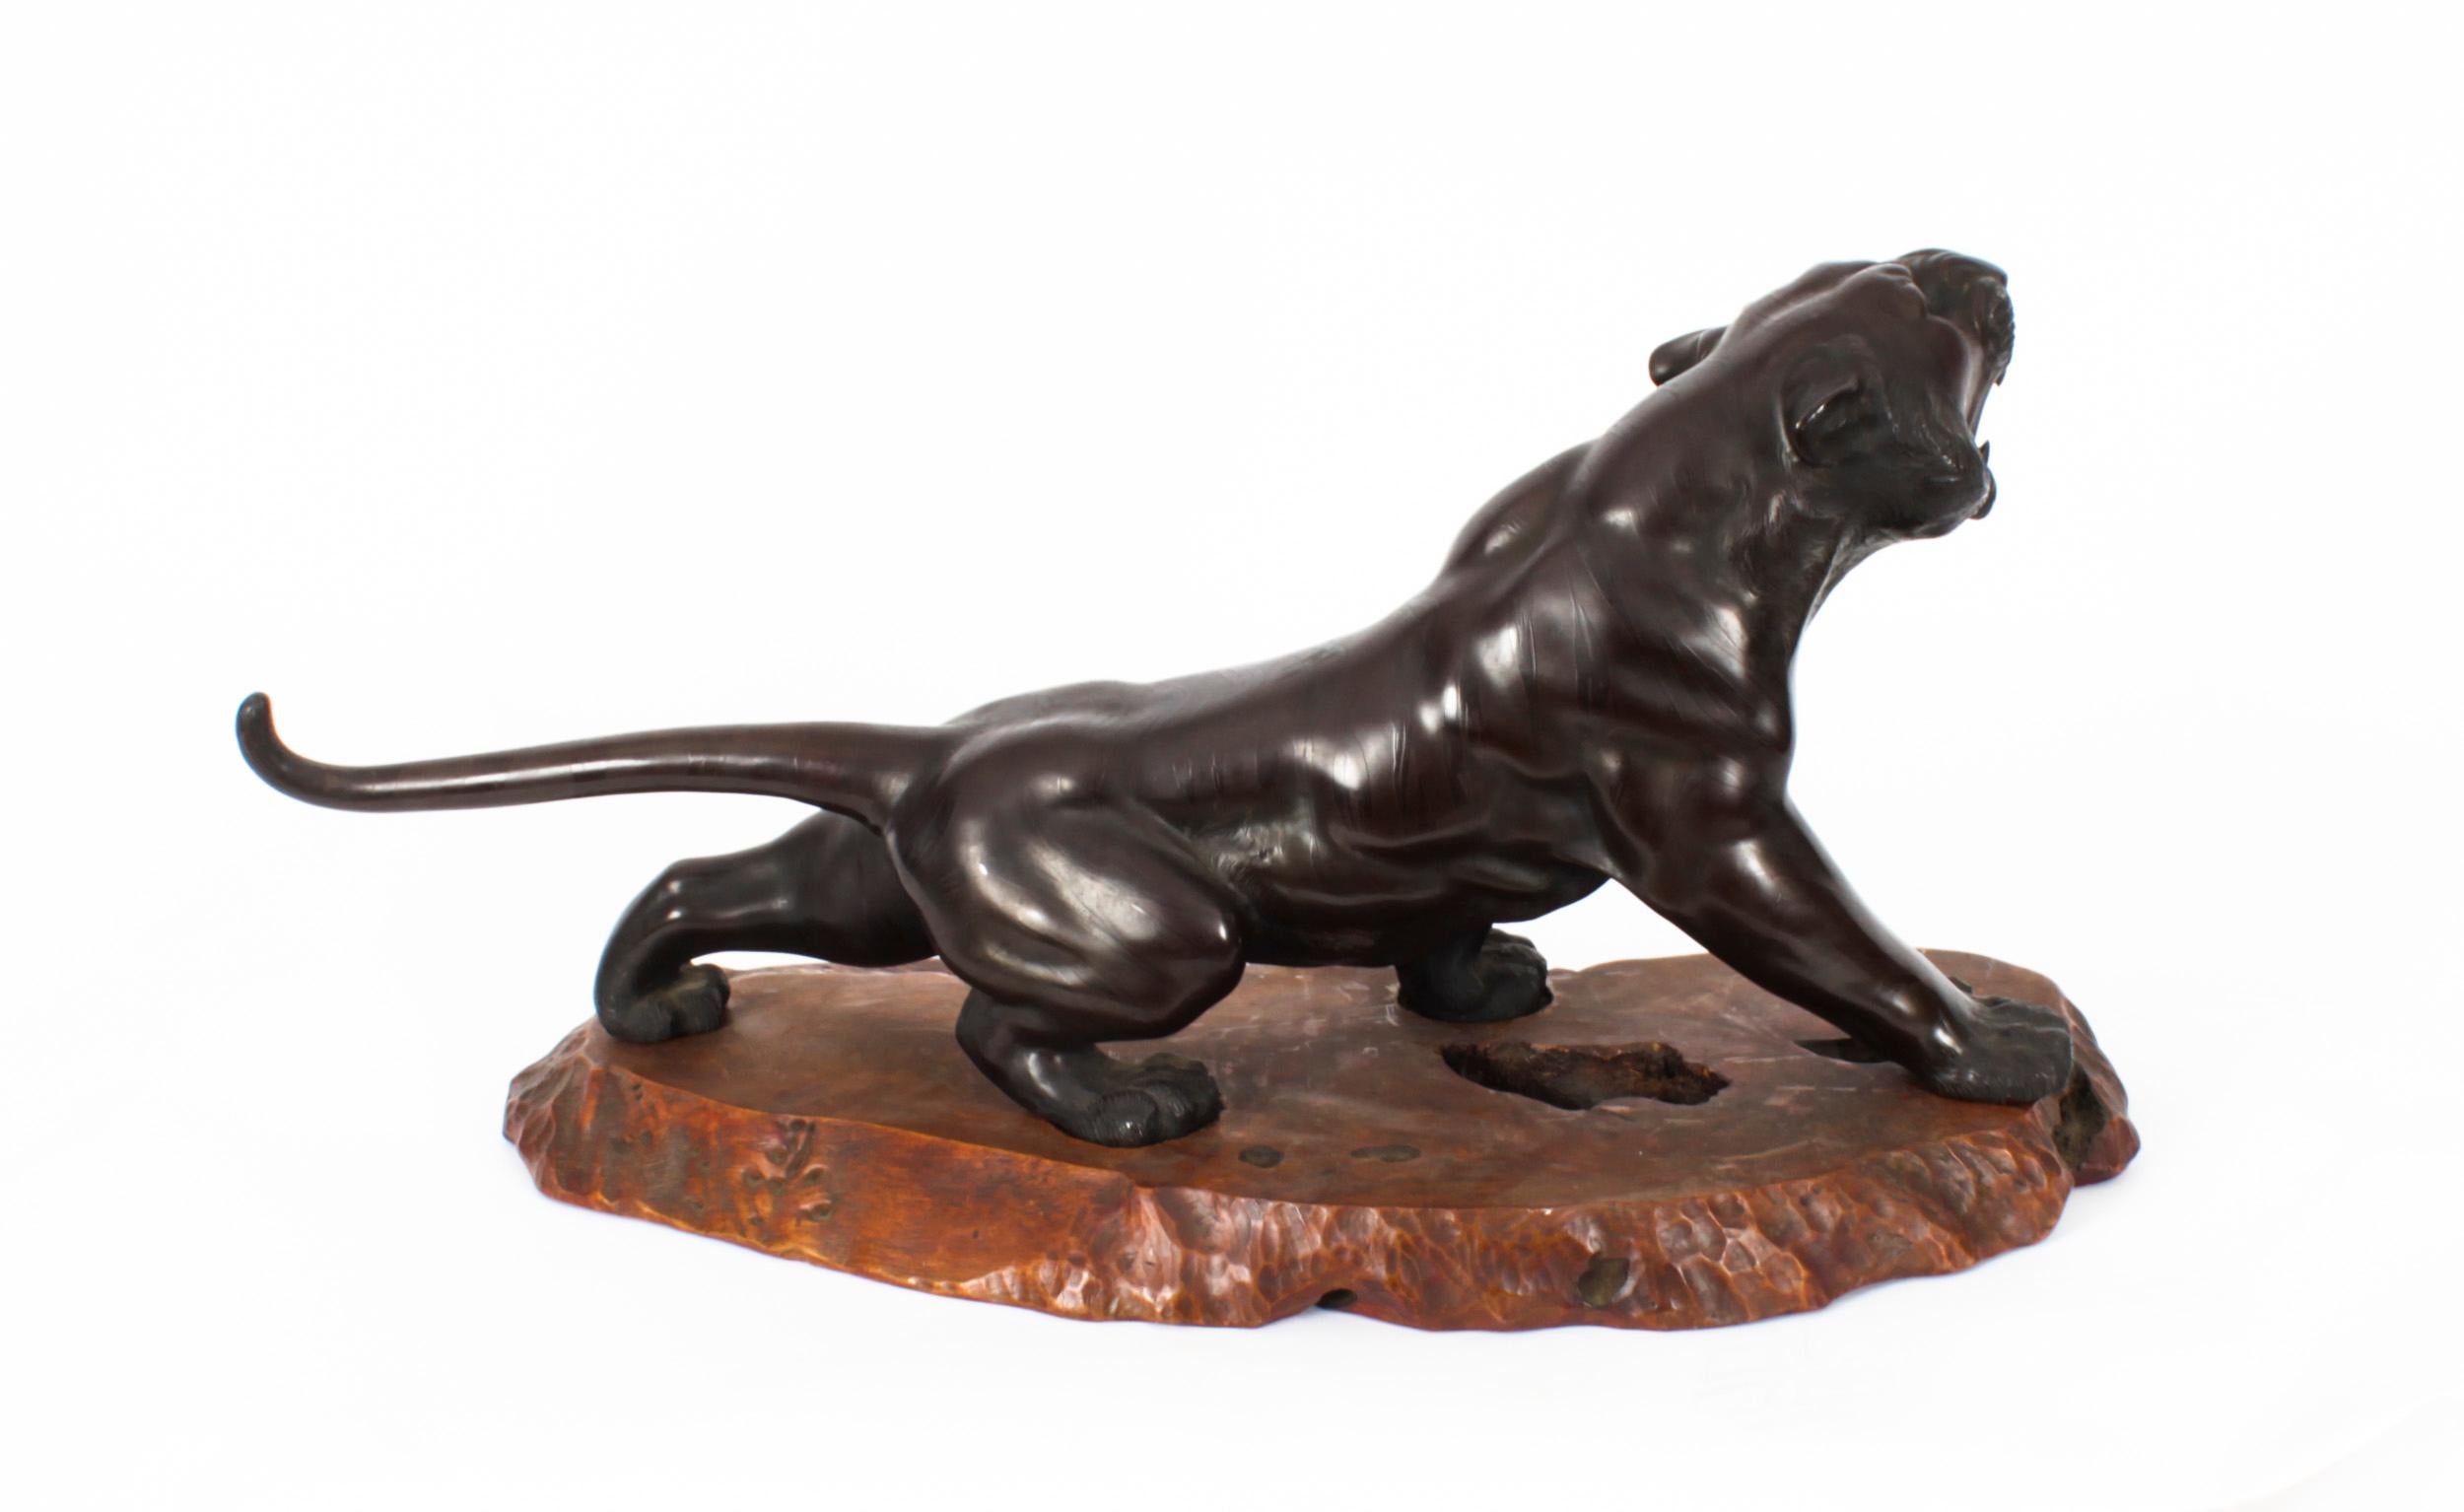 A beautiful large Japanese patinated bronze study of a crouching tiger, signed on the belly, Genryusai Seiya, Meiji period, 1868-1911 in date.
 
The finely cast sculpture shows a striding figure with its head raised and mouth open to reveal long